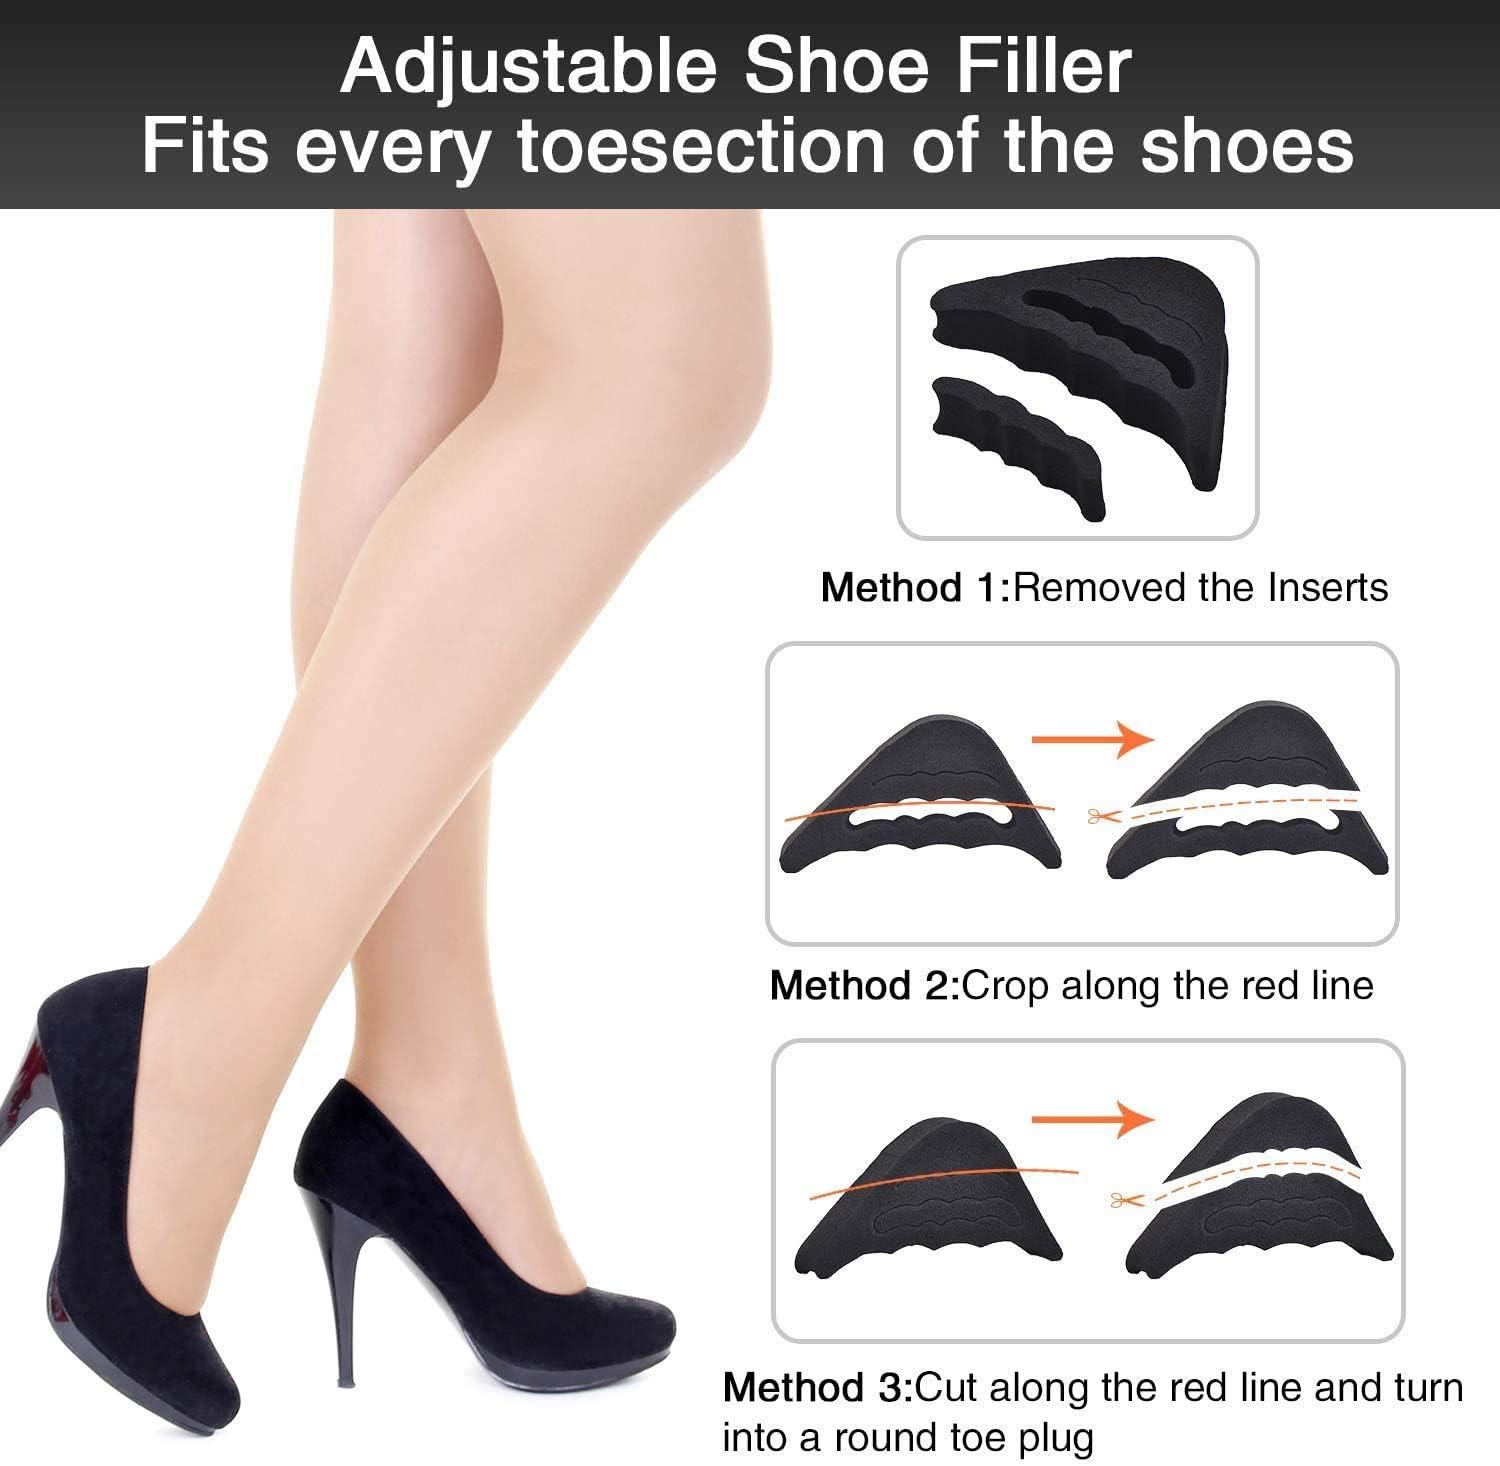 6 Pairs Toe Filler & Shoe Inserts, Adjustable Shoe Fillers Toe Filler  Inserts Big Toe Plug Foot Brace Pads for Pumps, Flats, Sneakers 